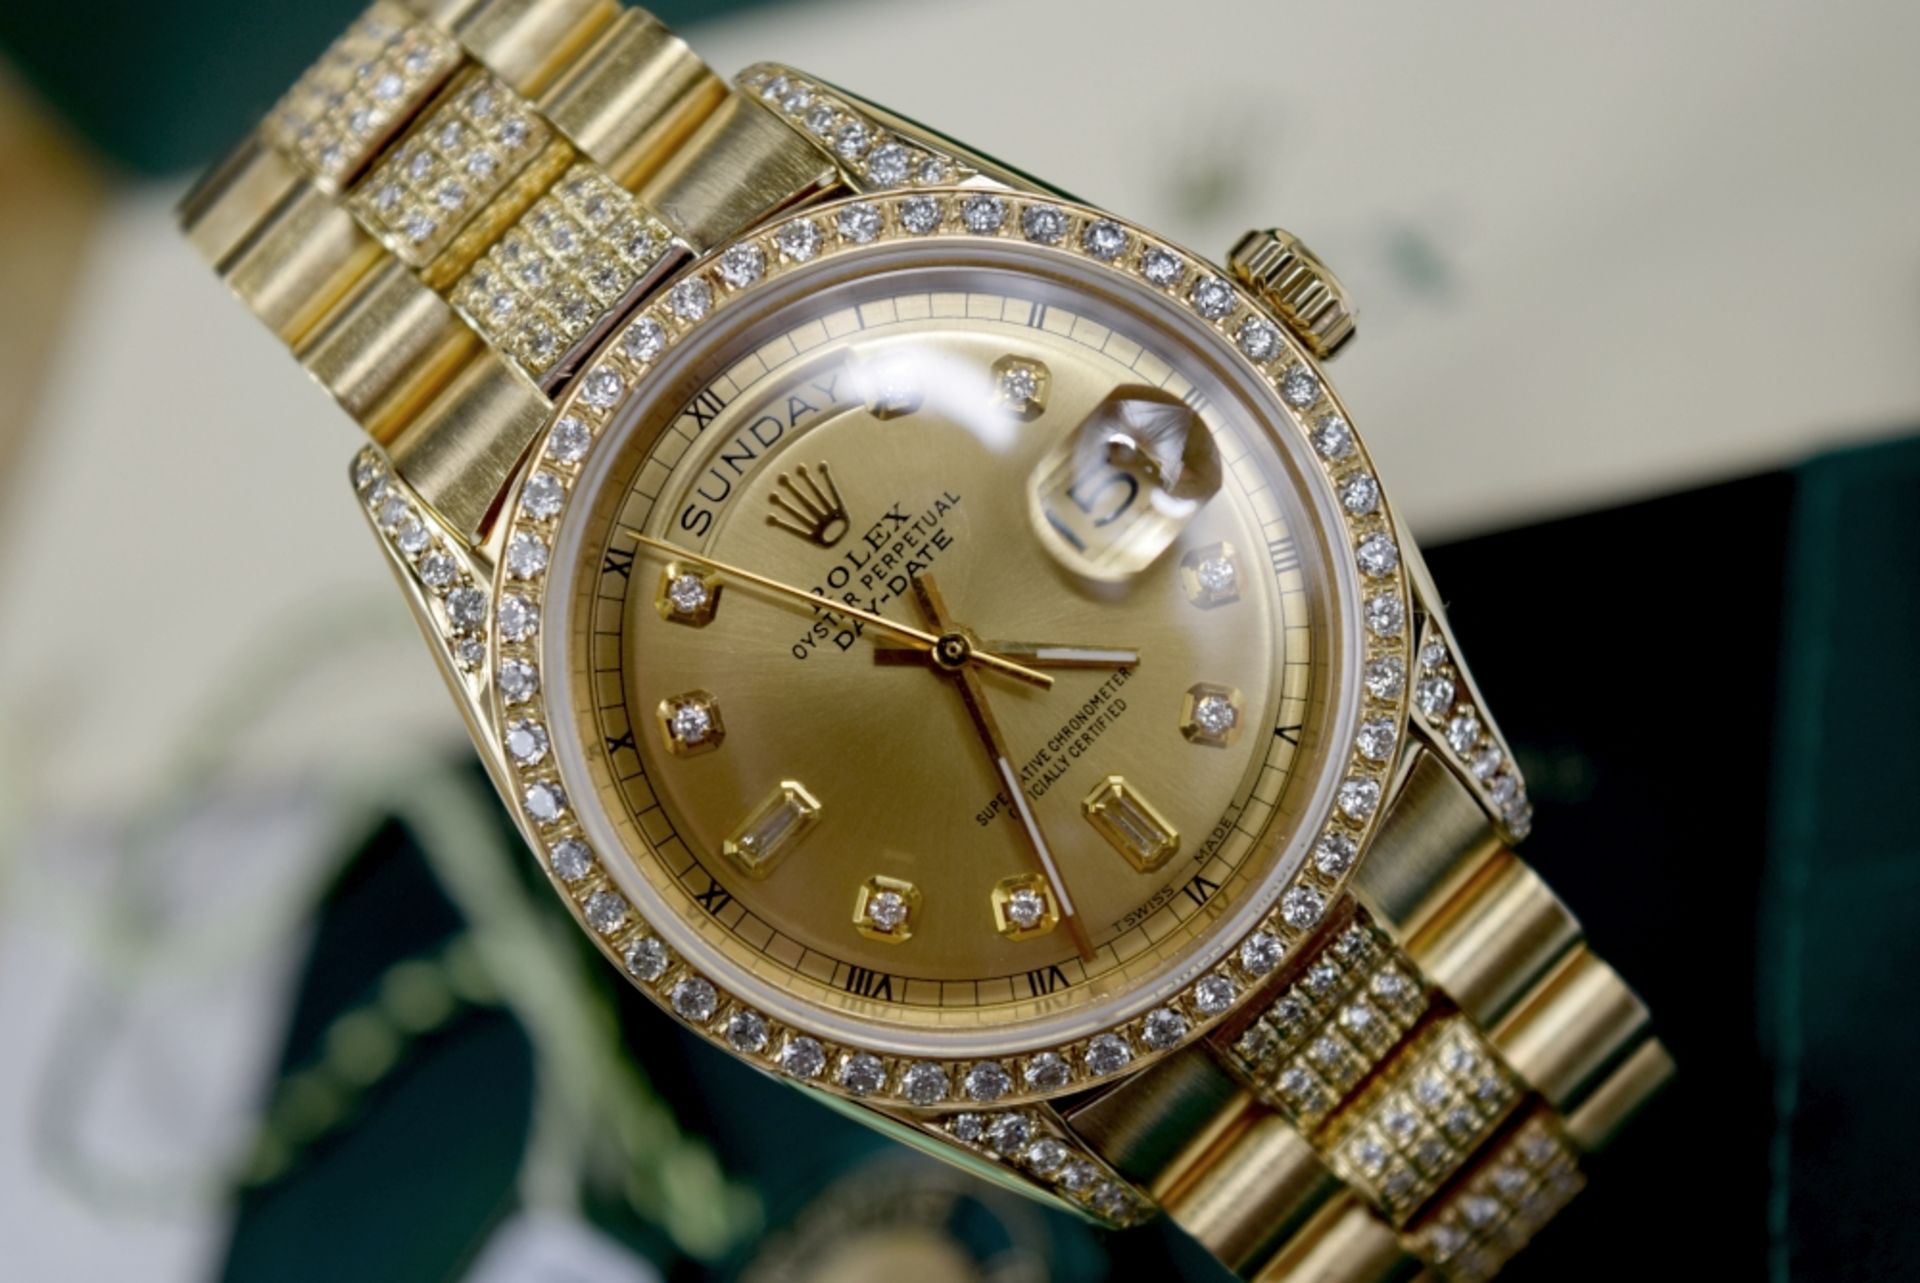 *The President* Gentleman's ROLEX Oyster Perpetual Day-Date - Solid 18K Gold & Diamond